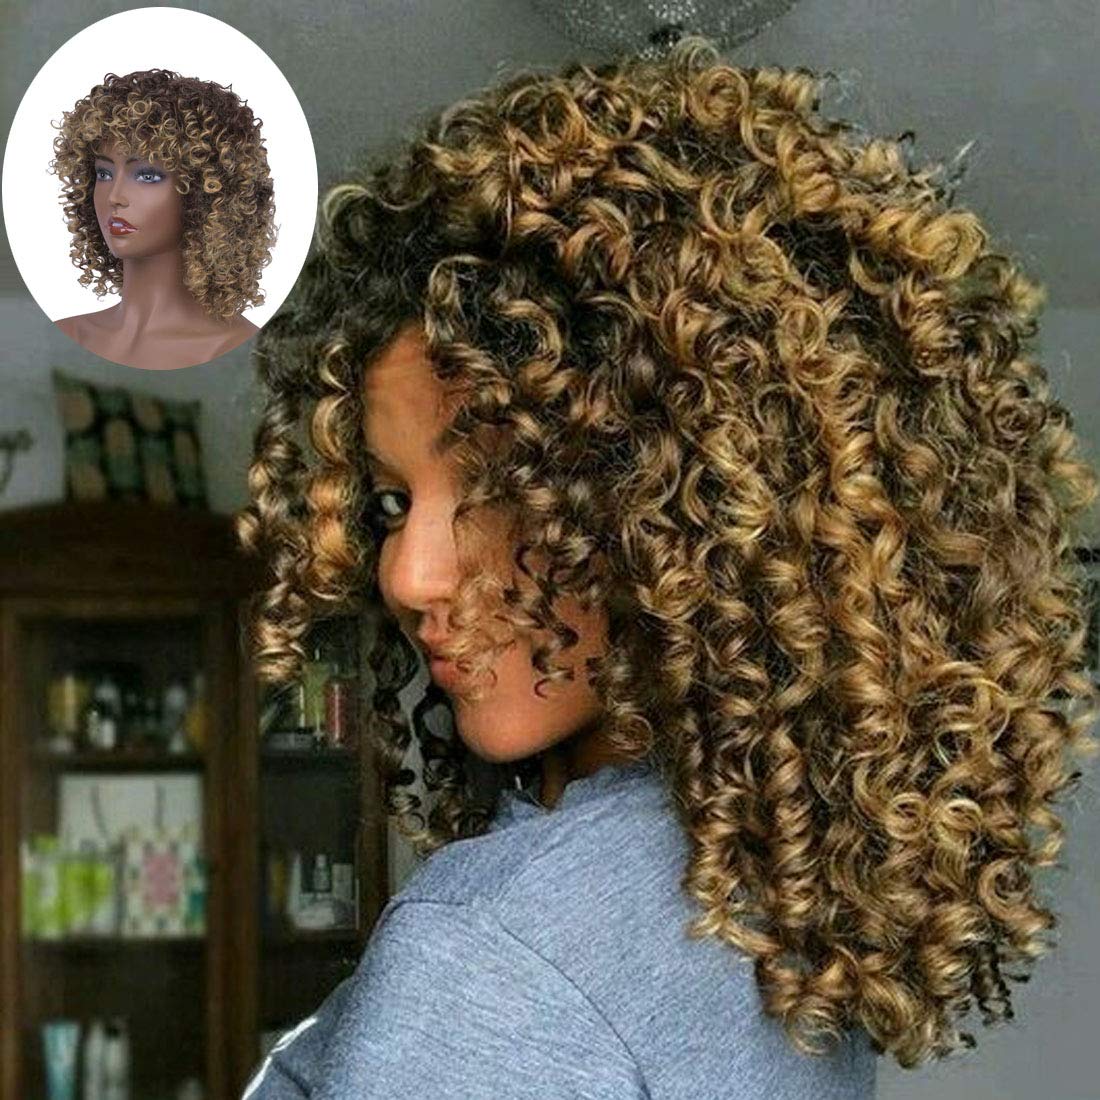 Price:$19.76     KimKSlay Short Curly Wigs for Black Women Afro Wig with Bangs Mixed Blonde Wig Synthetic Heat Resistant Kinky Curly Wig Shoulder Length (Mixed Blonde)   Beauty